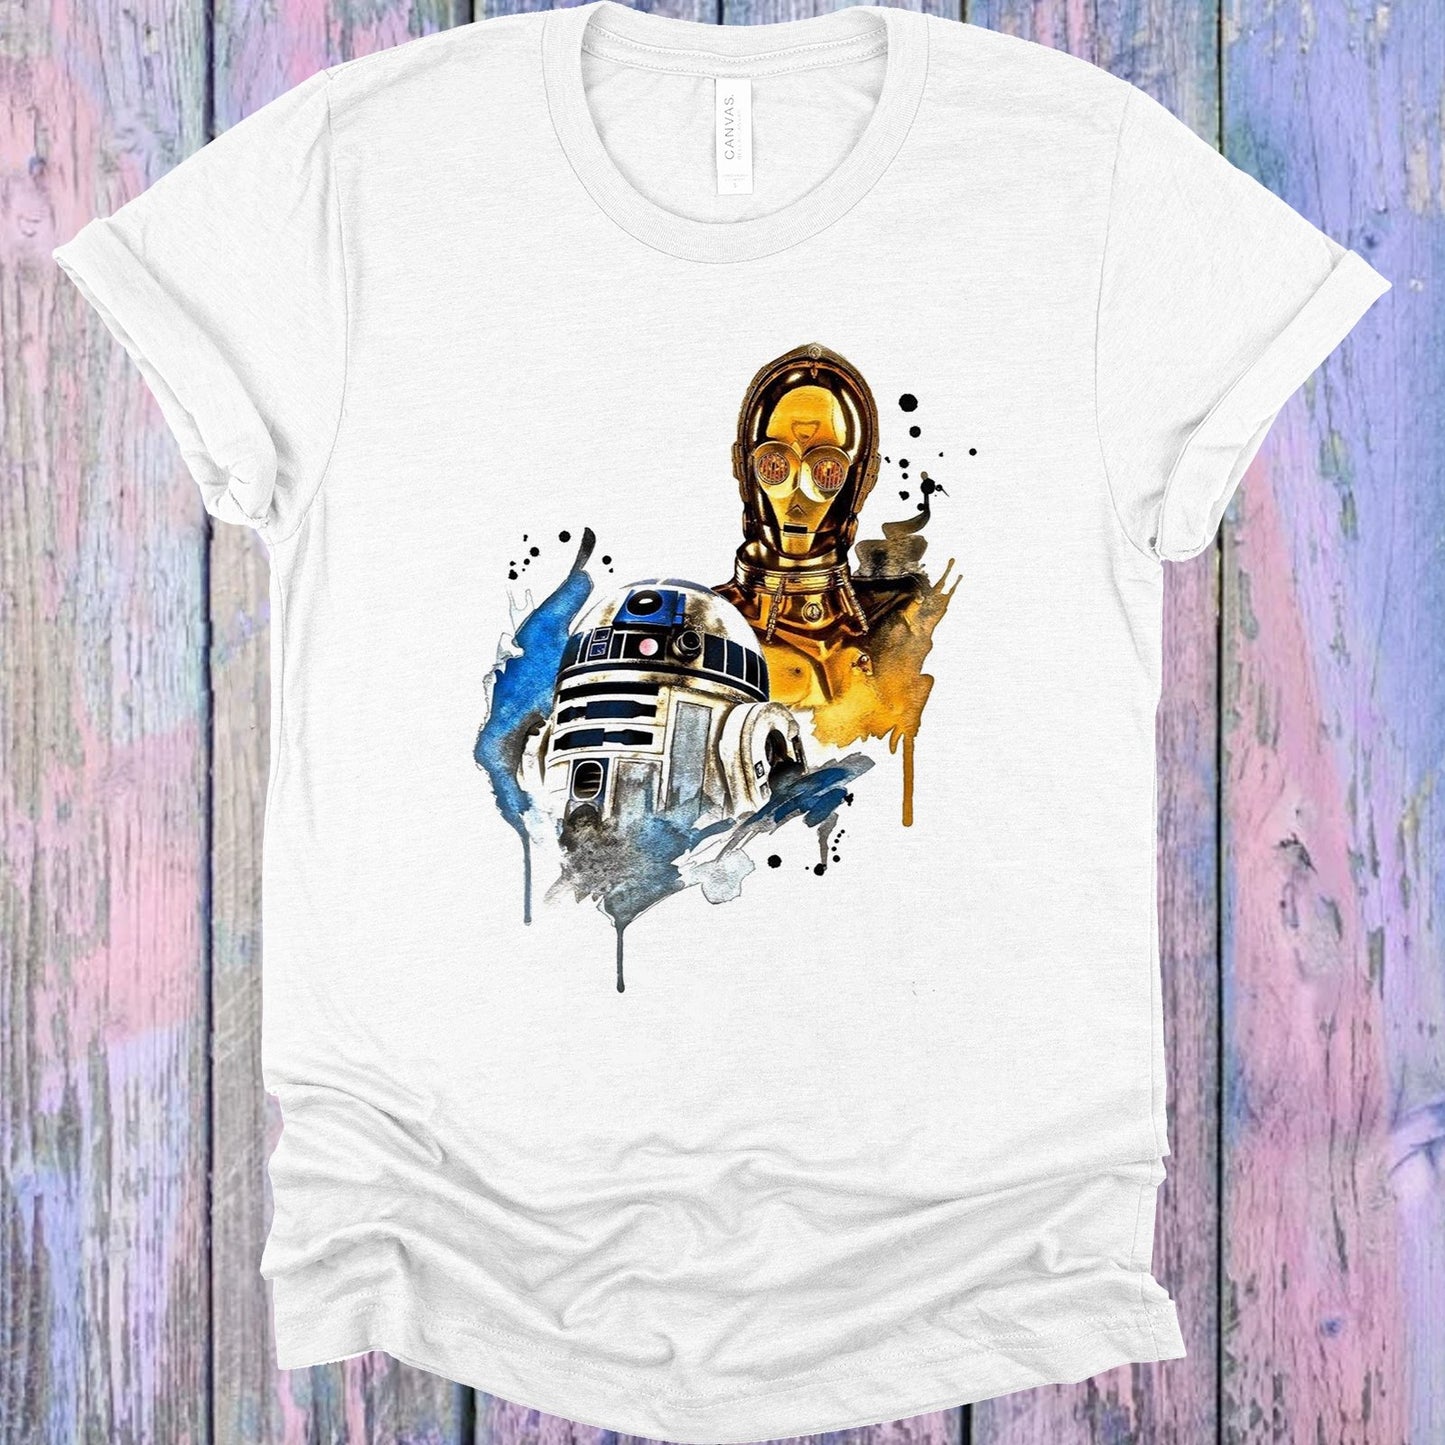 Star Wars Watercolor Graphic Tee Graphic Tee